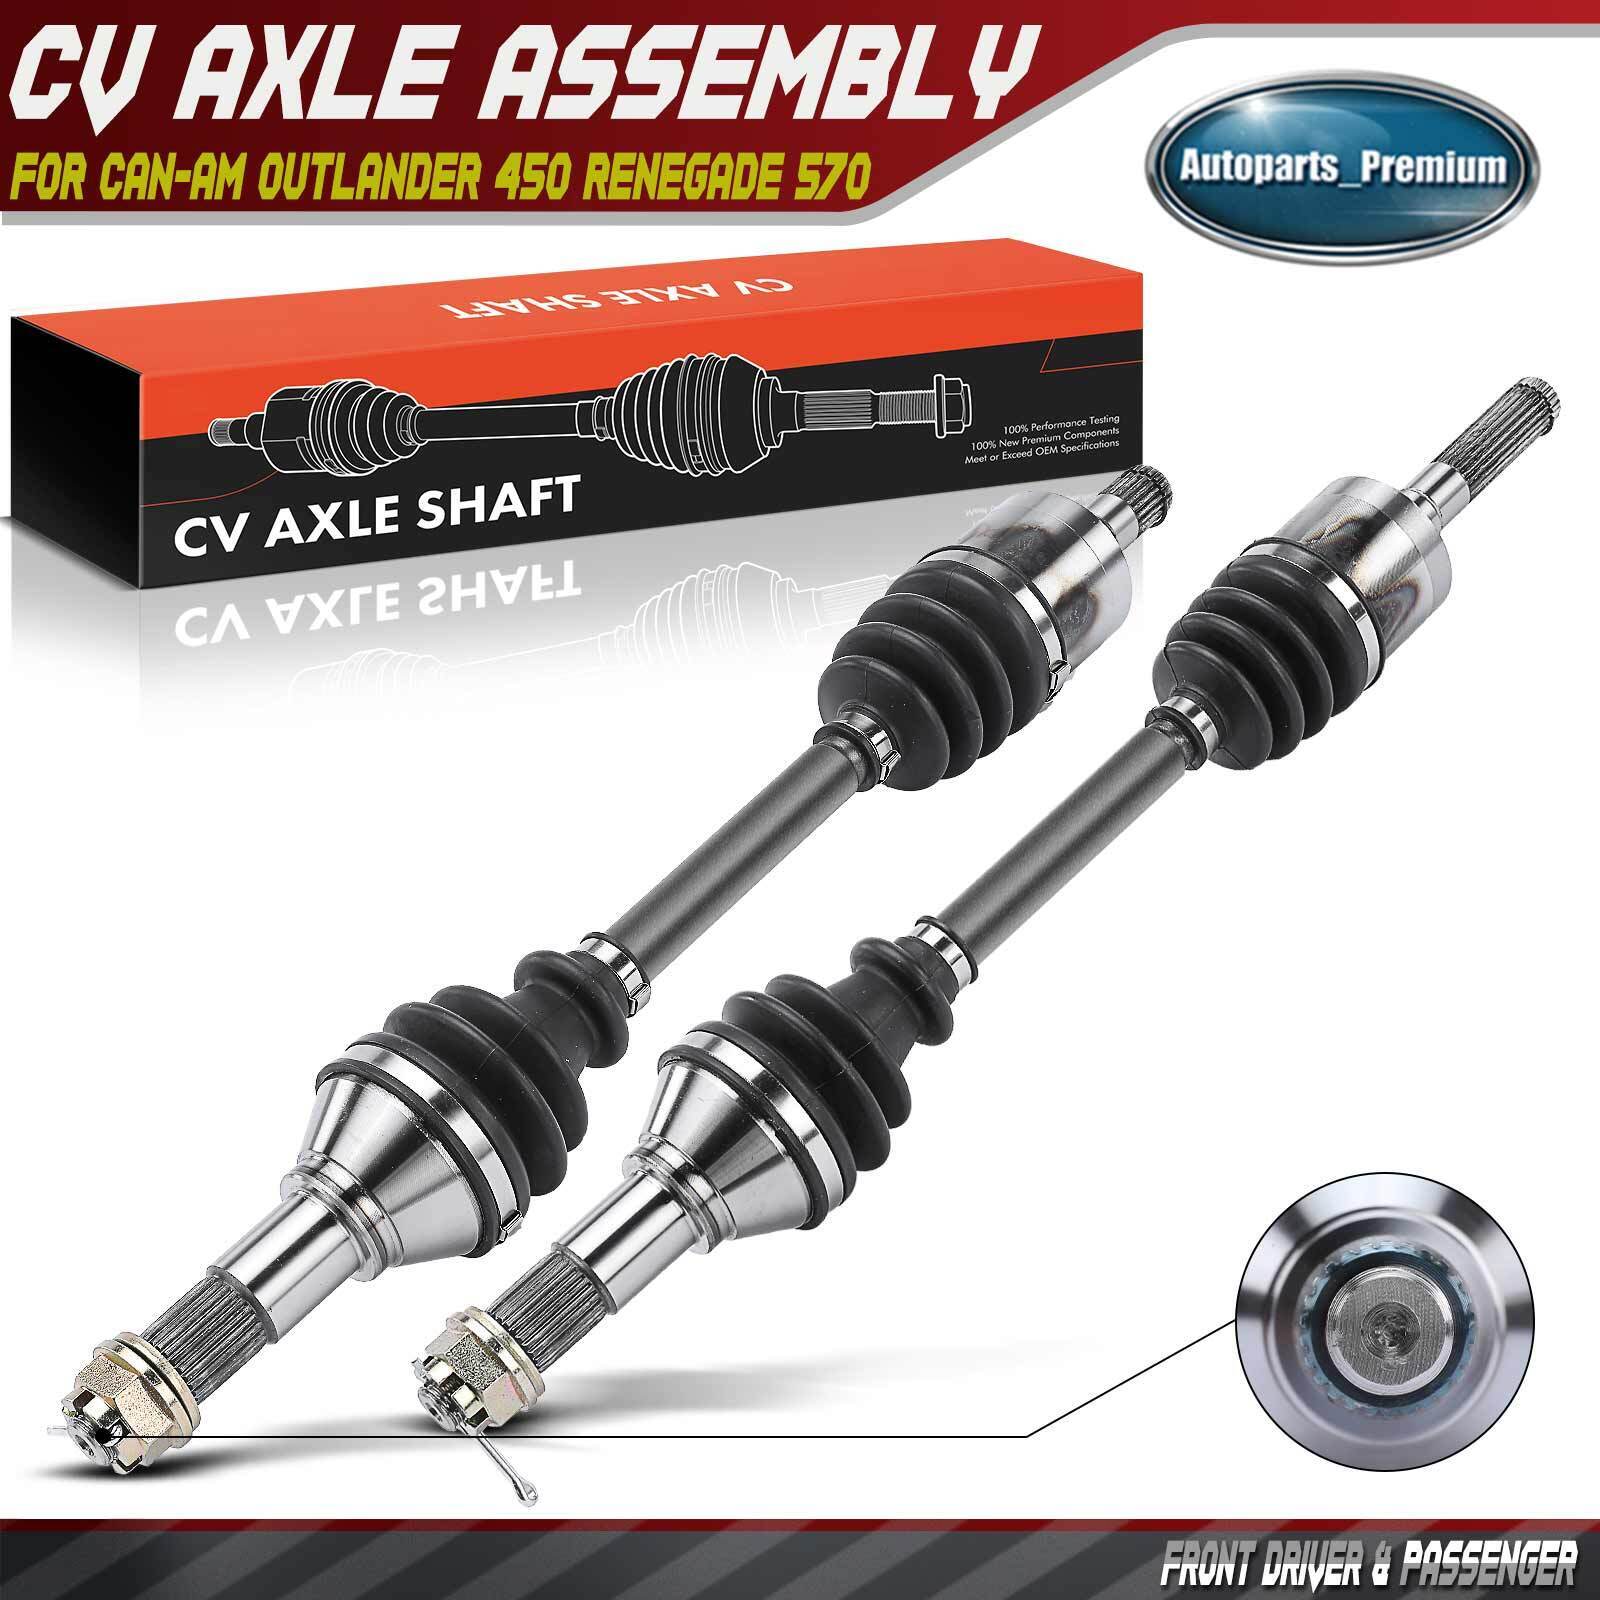 2x Front Left & Right CV Axle Assembly for Can-Am Outlander 450 500 Renegade 570